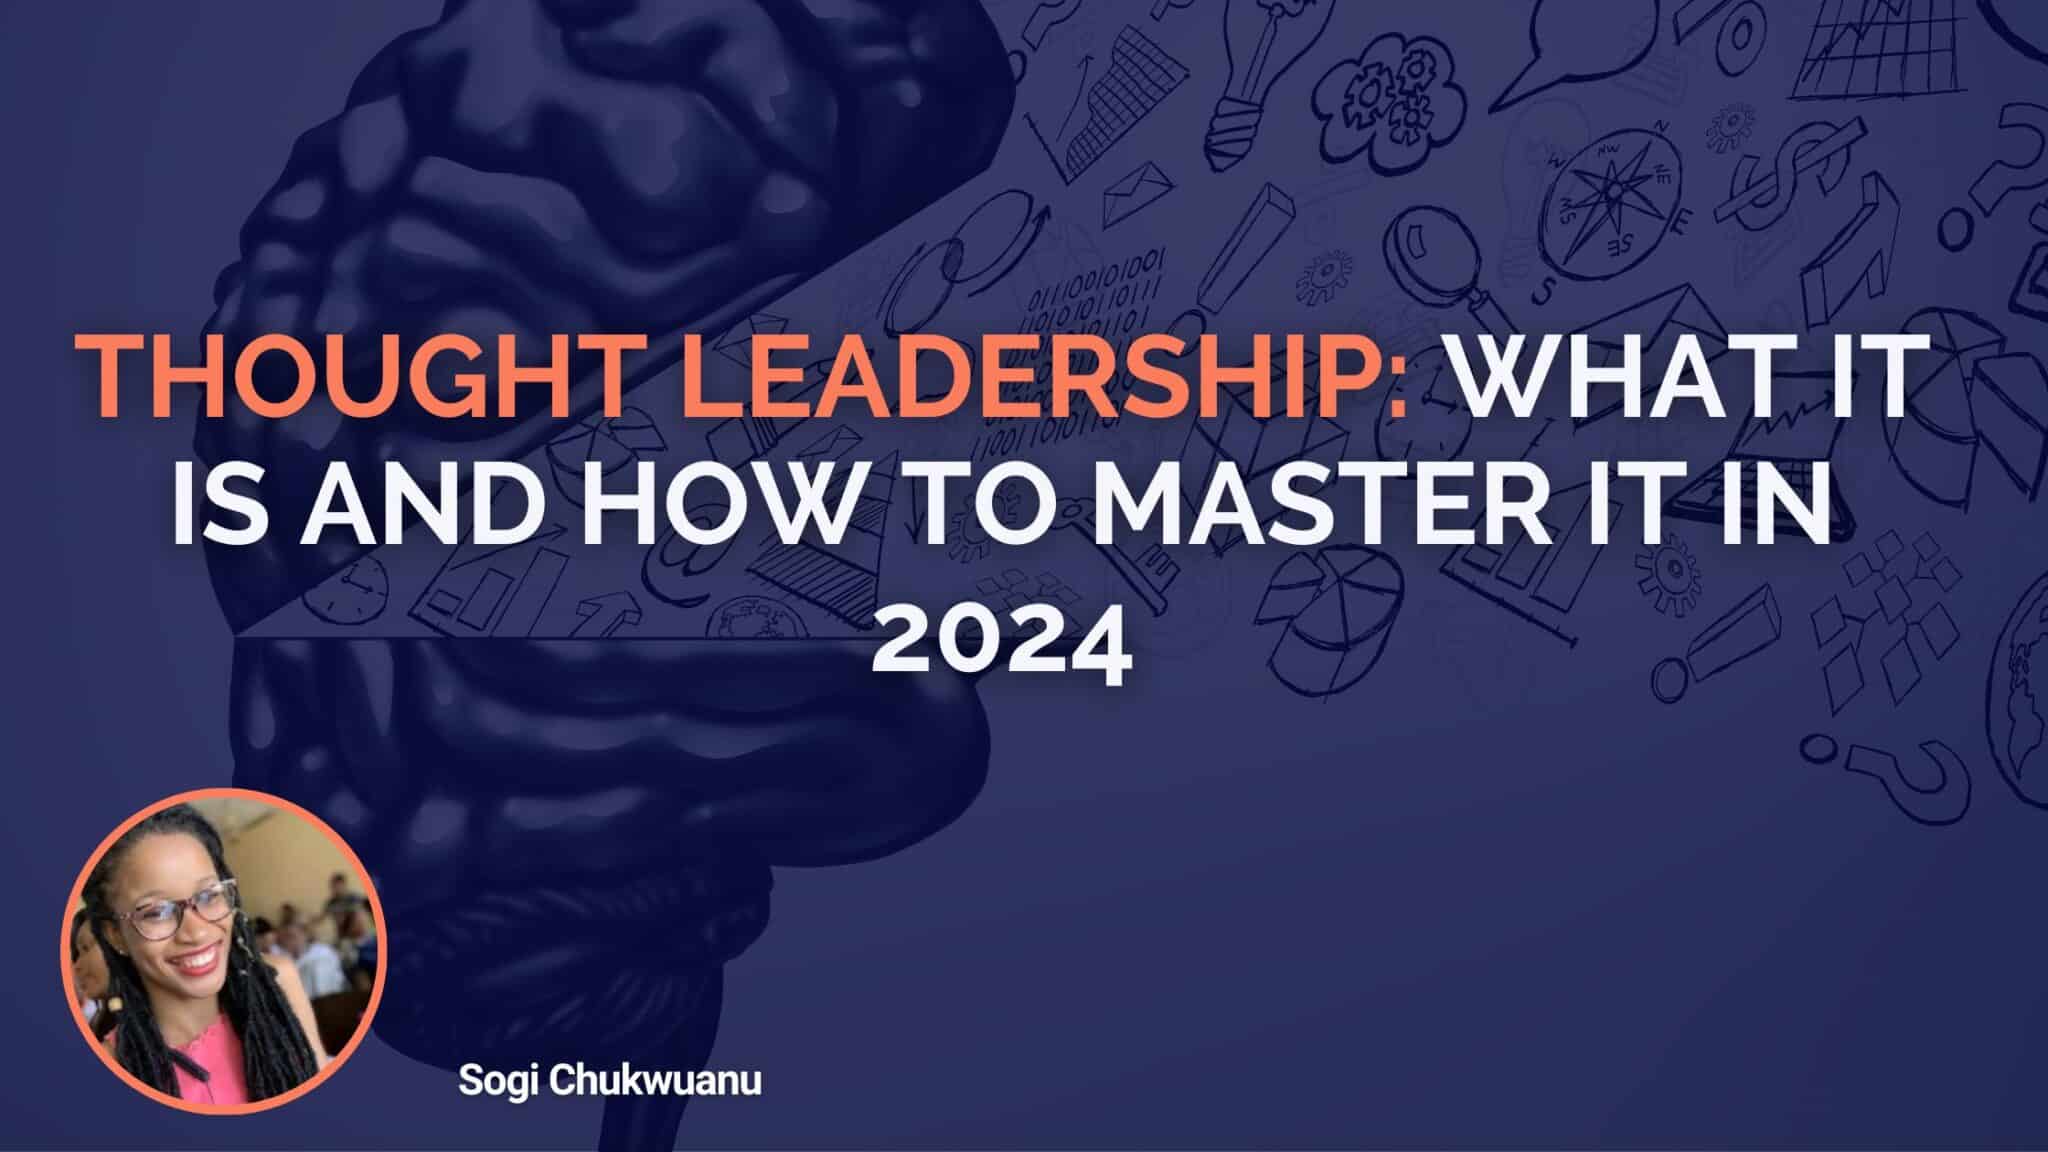 Thought Leadership: What It Is And How To Master It In 2024